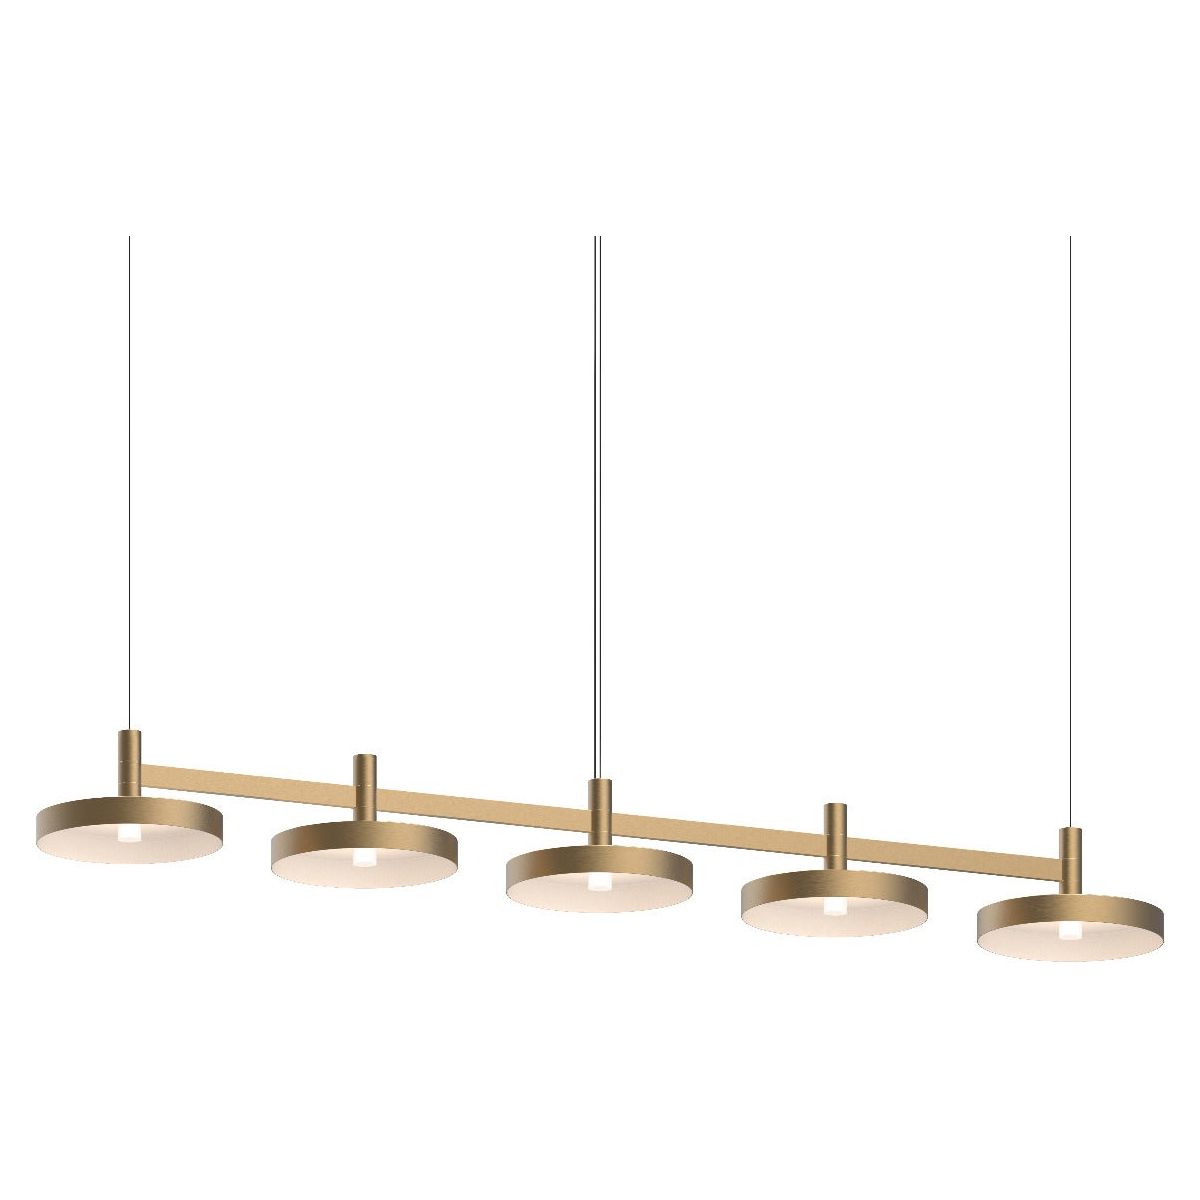 Systema Staccato 5-Light Linear Pendant with Pan Shades